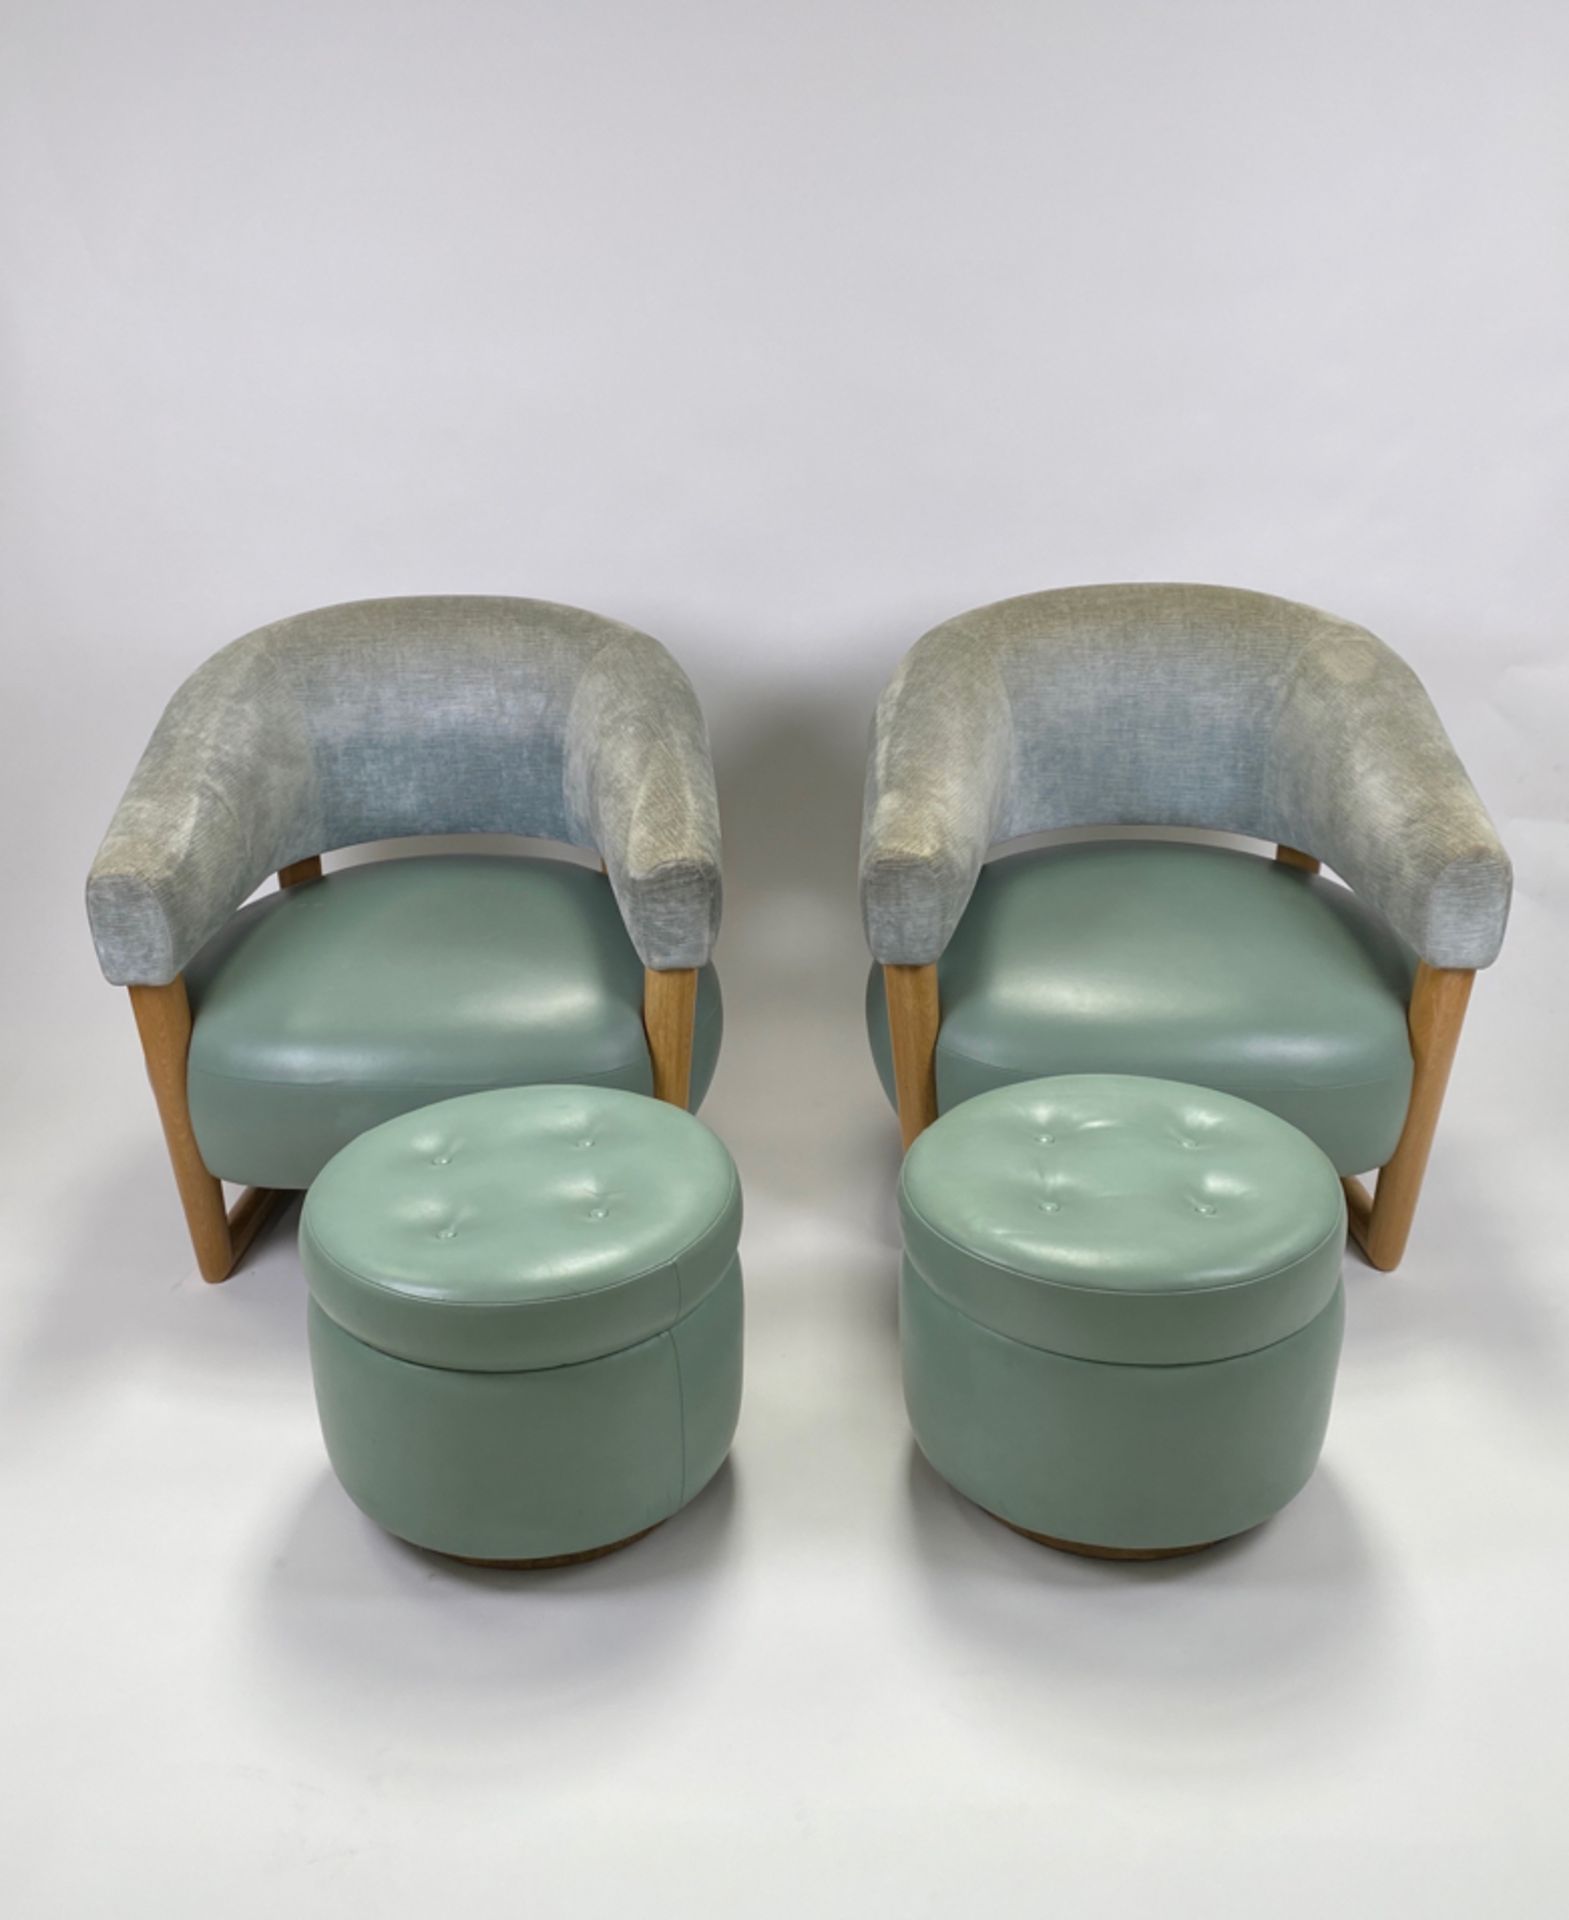 Pair of Teal Leather Lounge Chairs with Pouffes